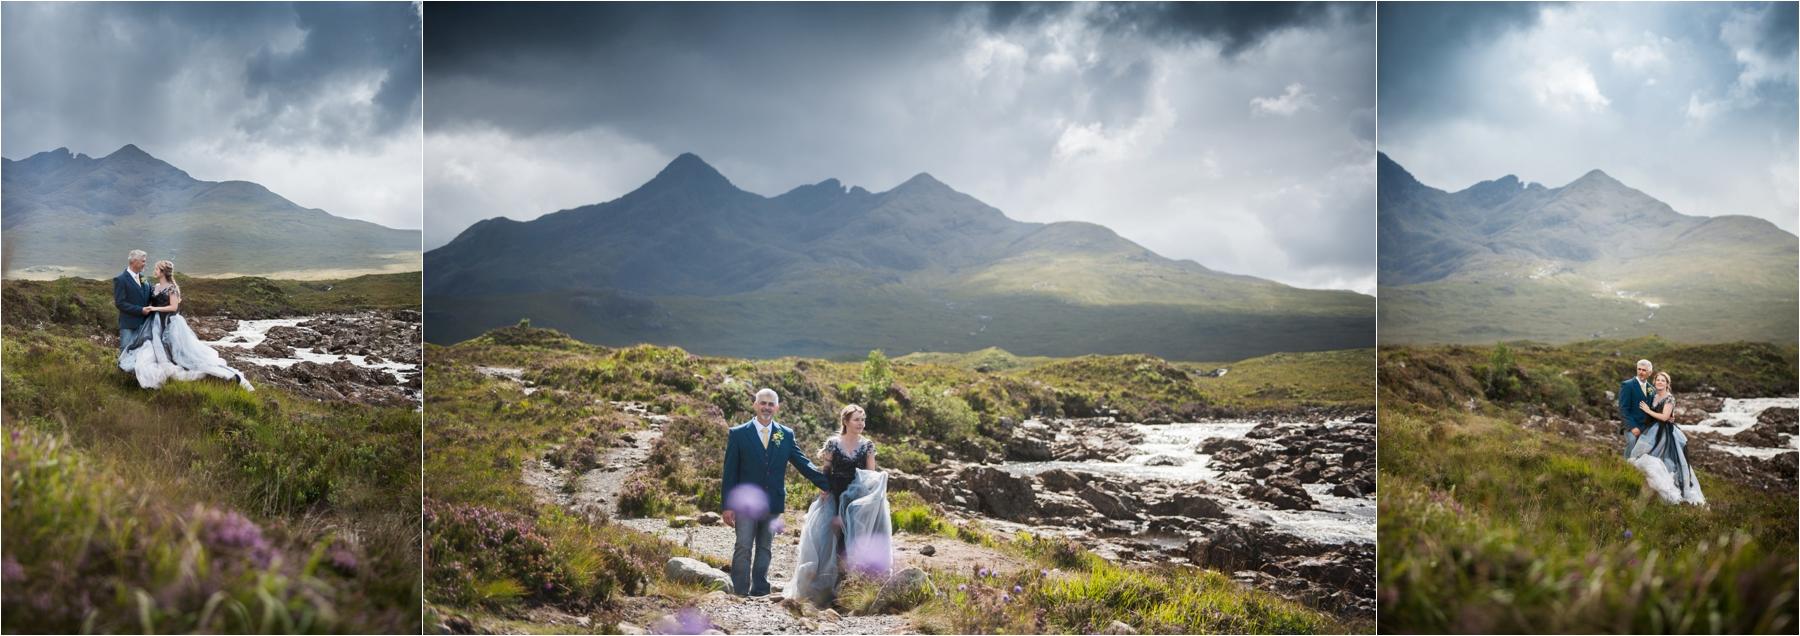 Bride and groom photos with stormy skies on the Isle of Skye. The bride is wearing a blue and grey bridal gown over walking boots. 